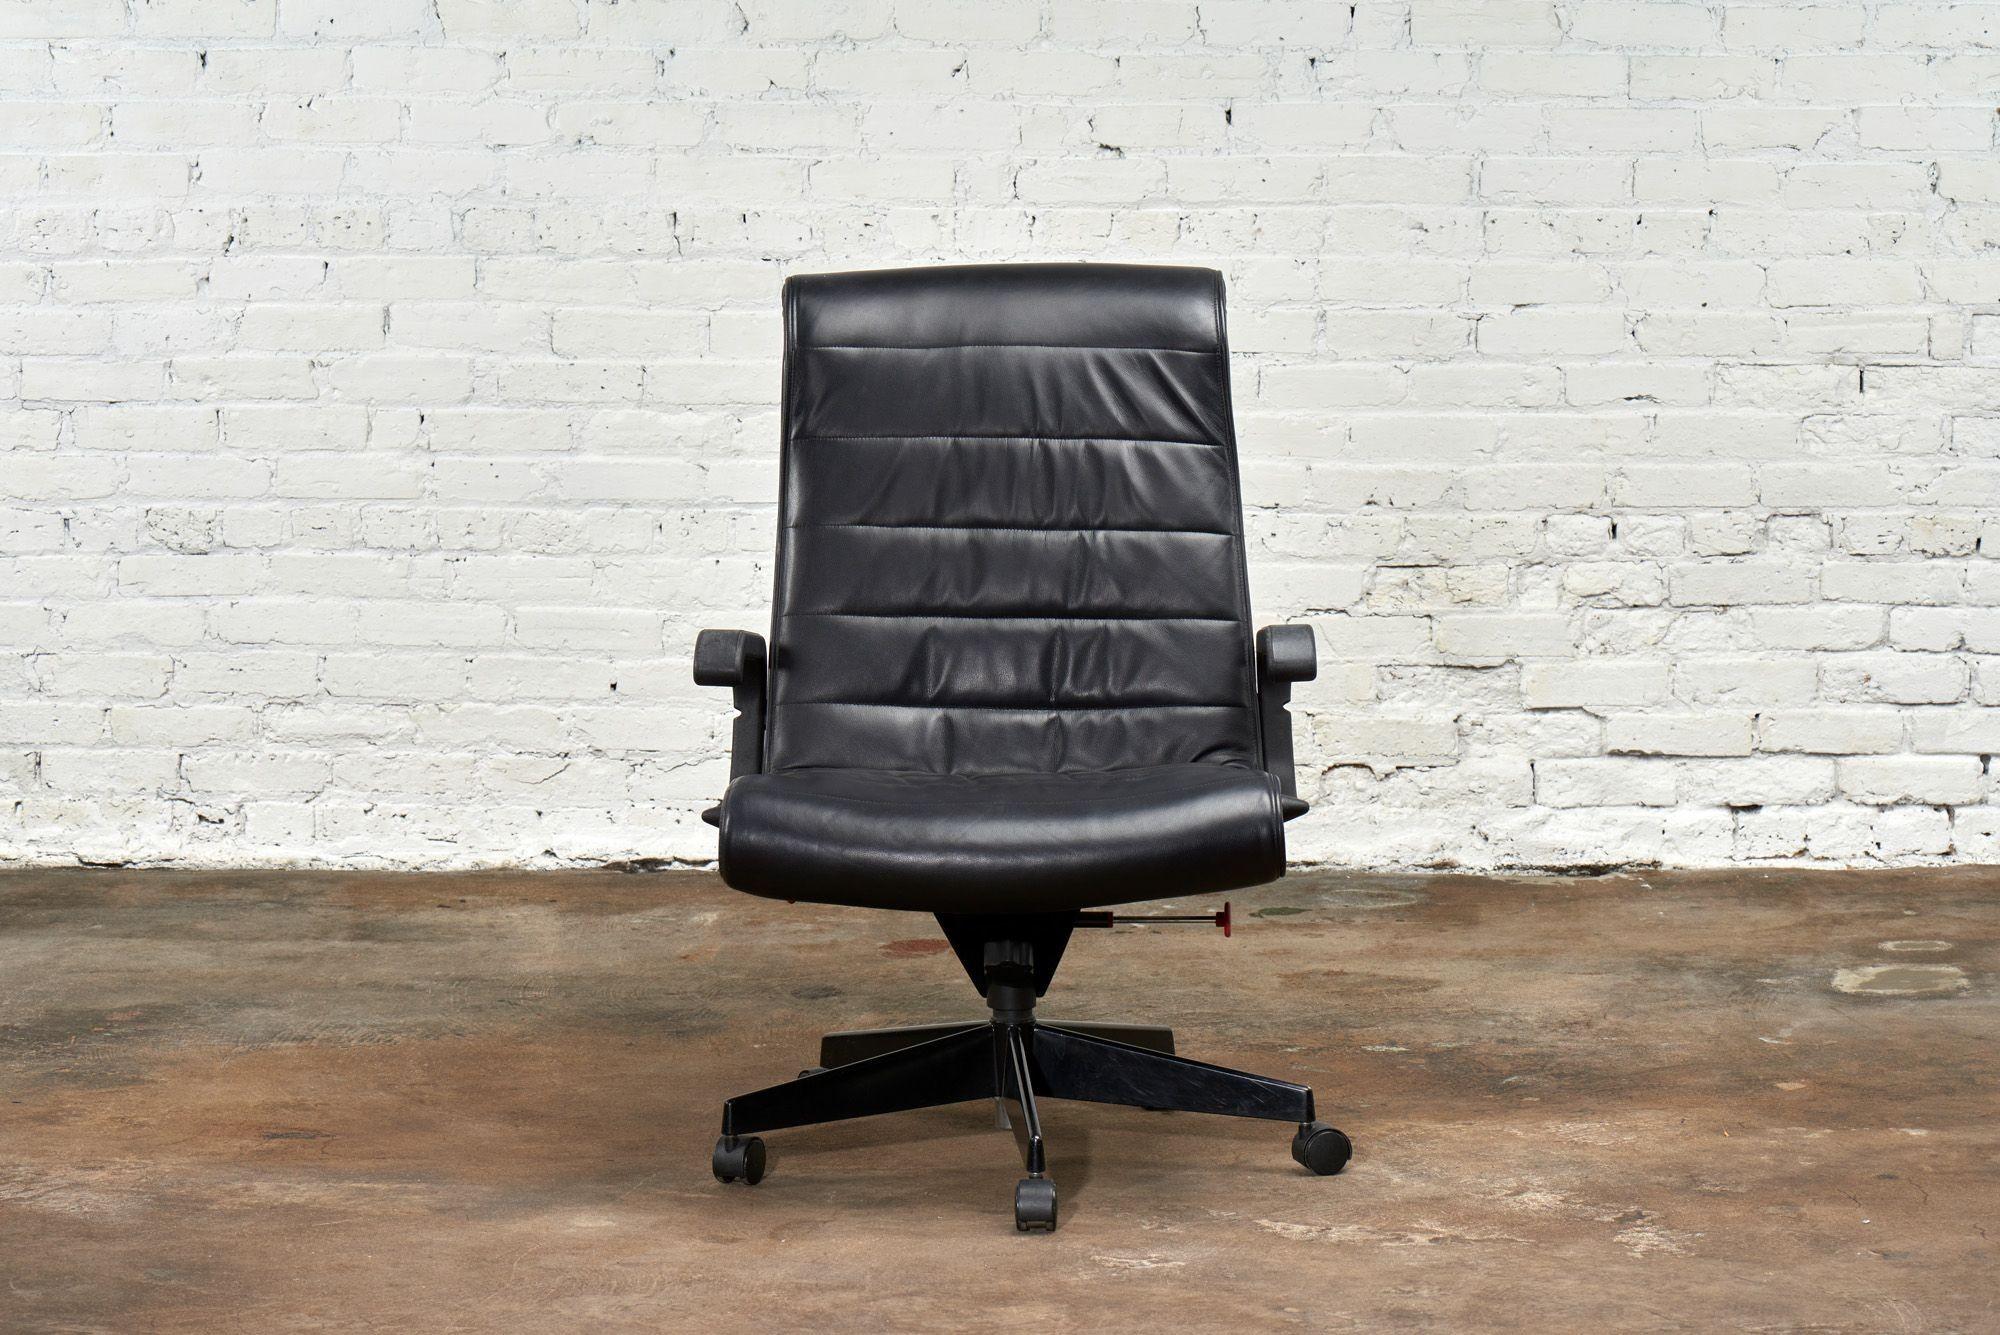 Black Leather Office chair for Knoll Inc/Knoll International, France 1992. Original leather in excellent condition.